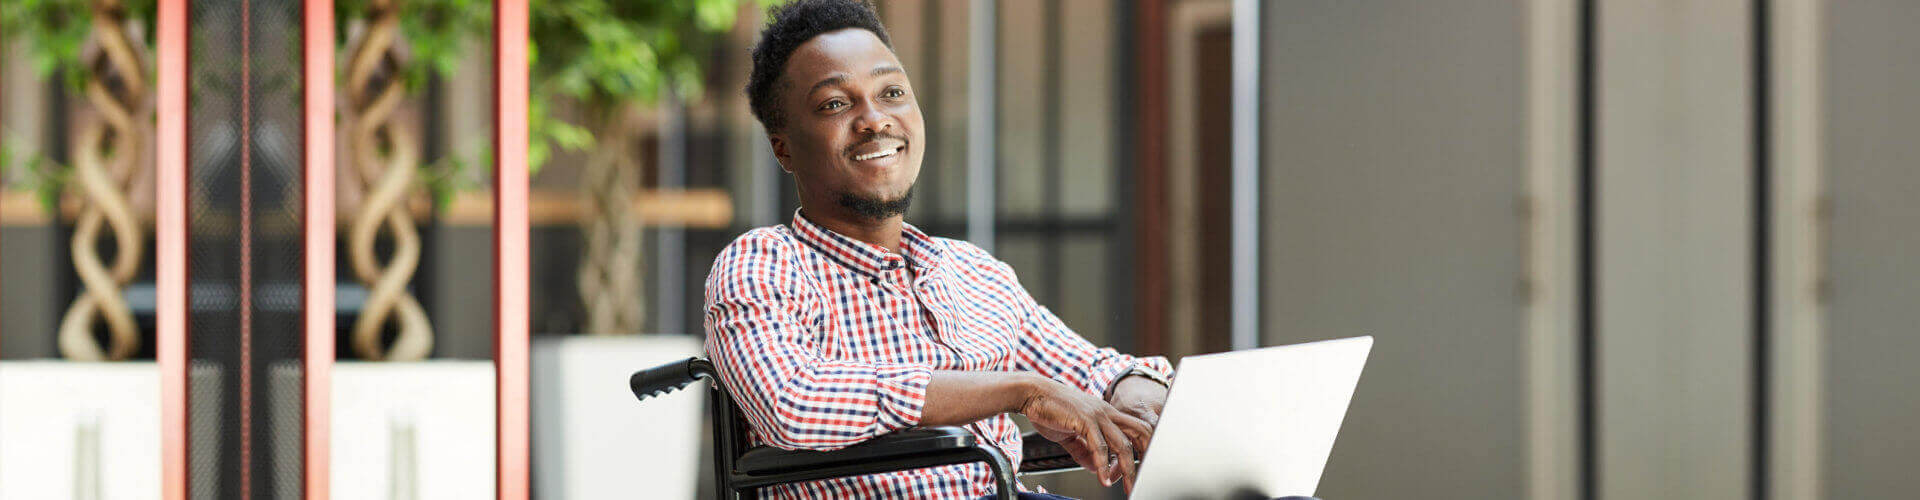 African smiling man sitting in wheelchair and using laptop computer in the mall